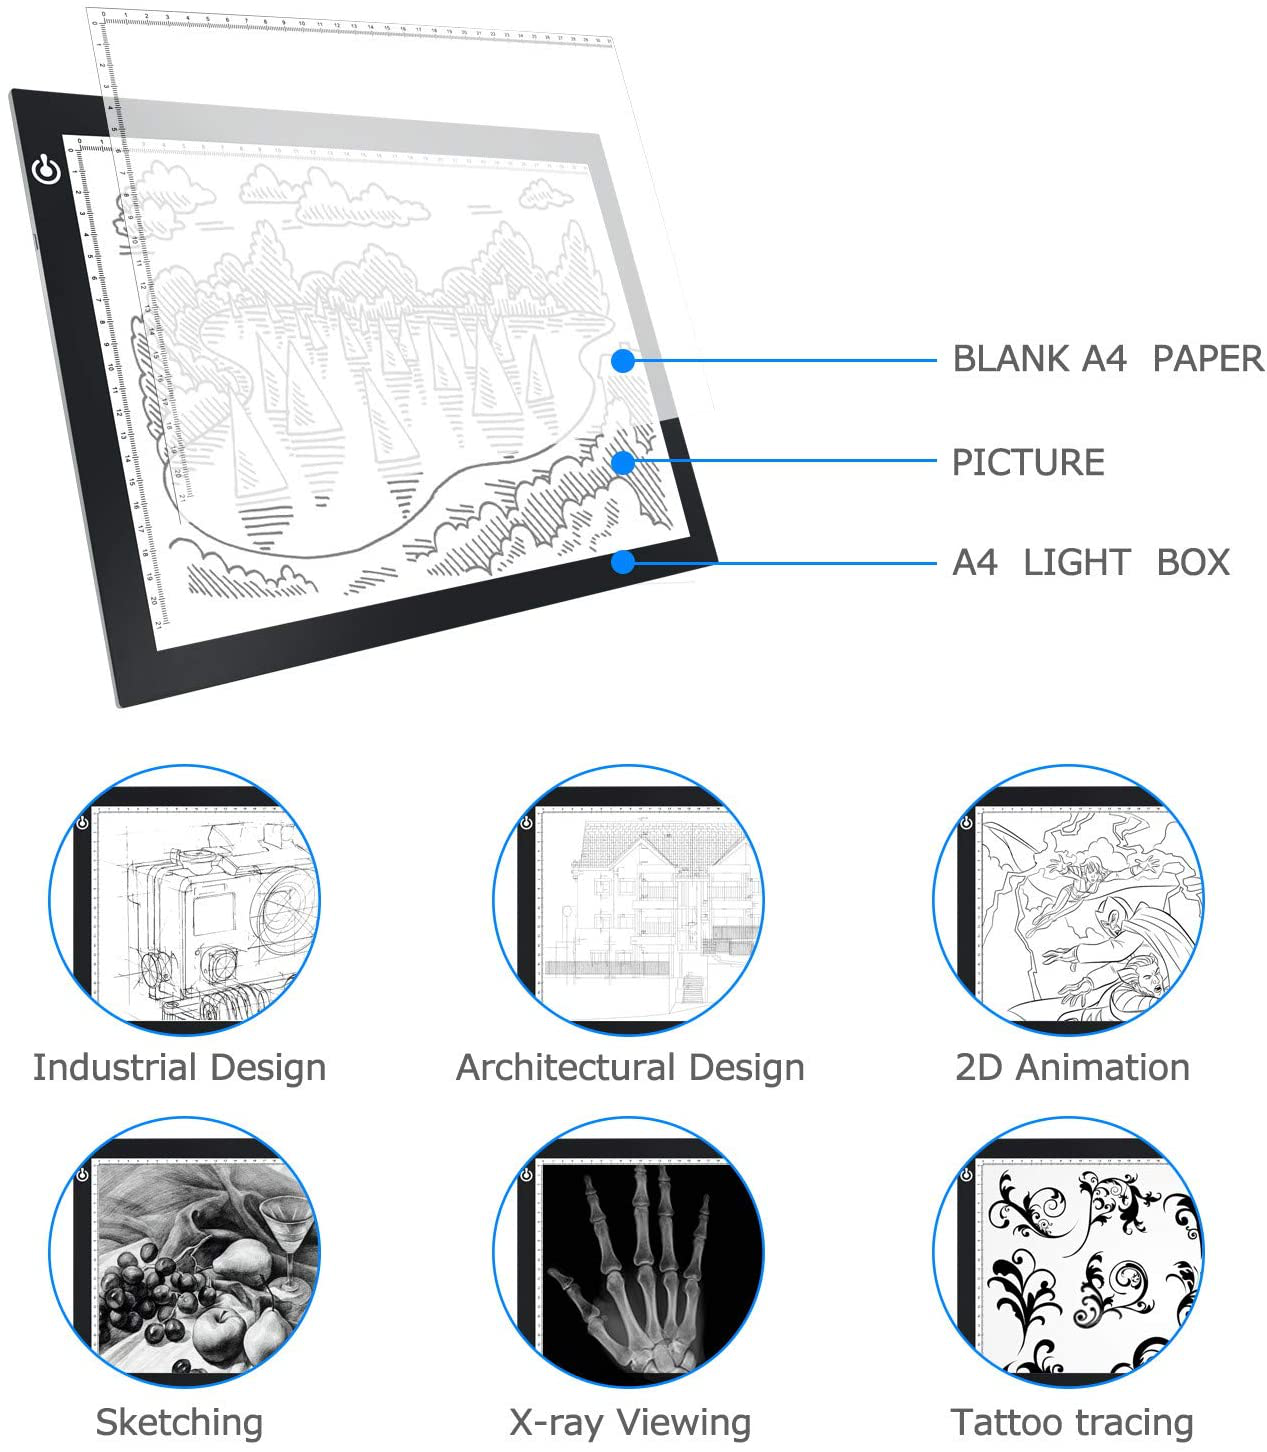 Tracing LED Copy Board Light Box, Ultra-Thin Adjustable USB Power Artcraft LED Trace Light Pad for Tattoo Drawing, Streaming, Sketching, Animation, Stenciling